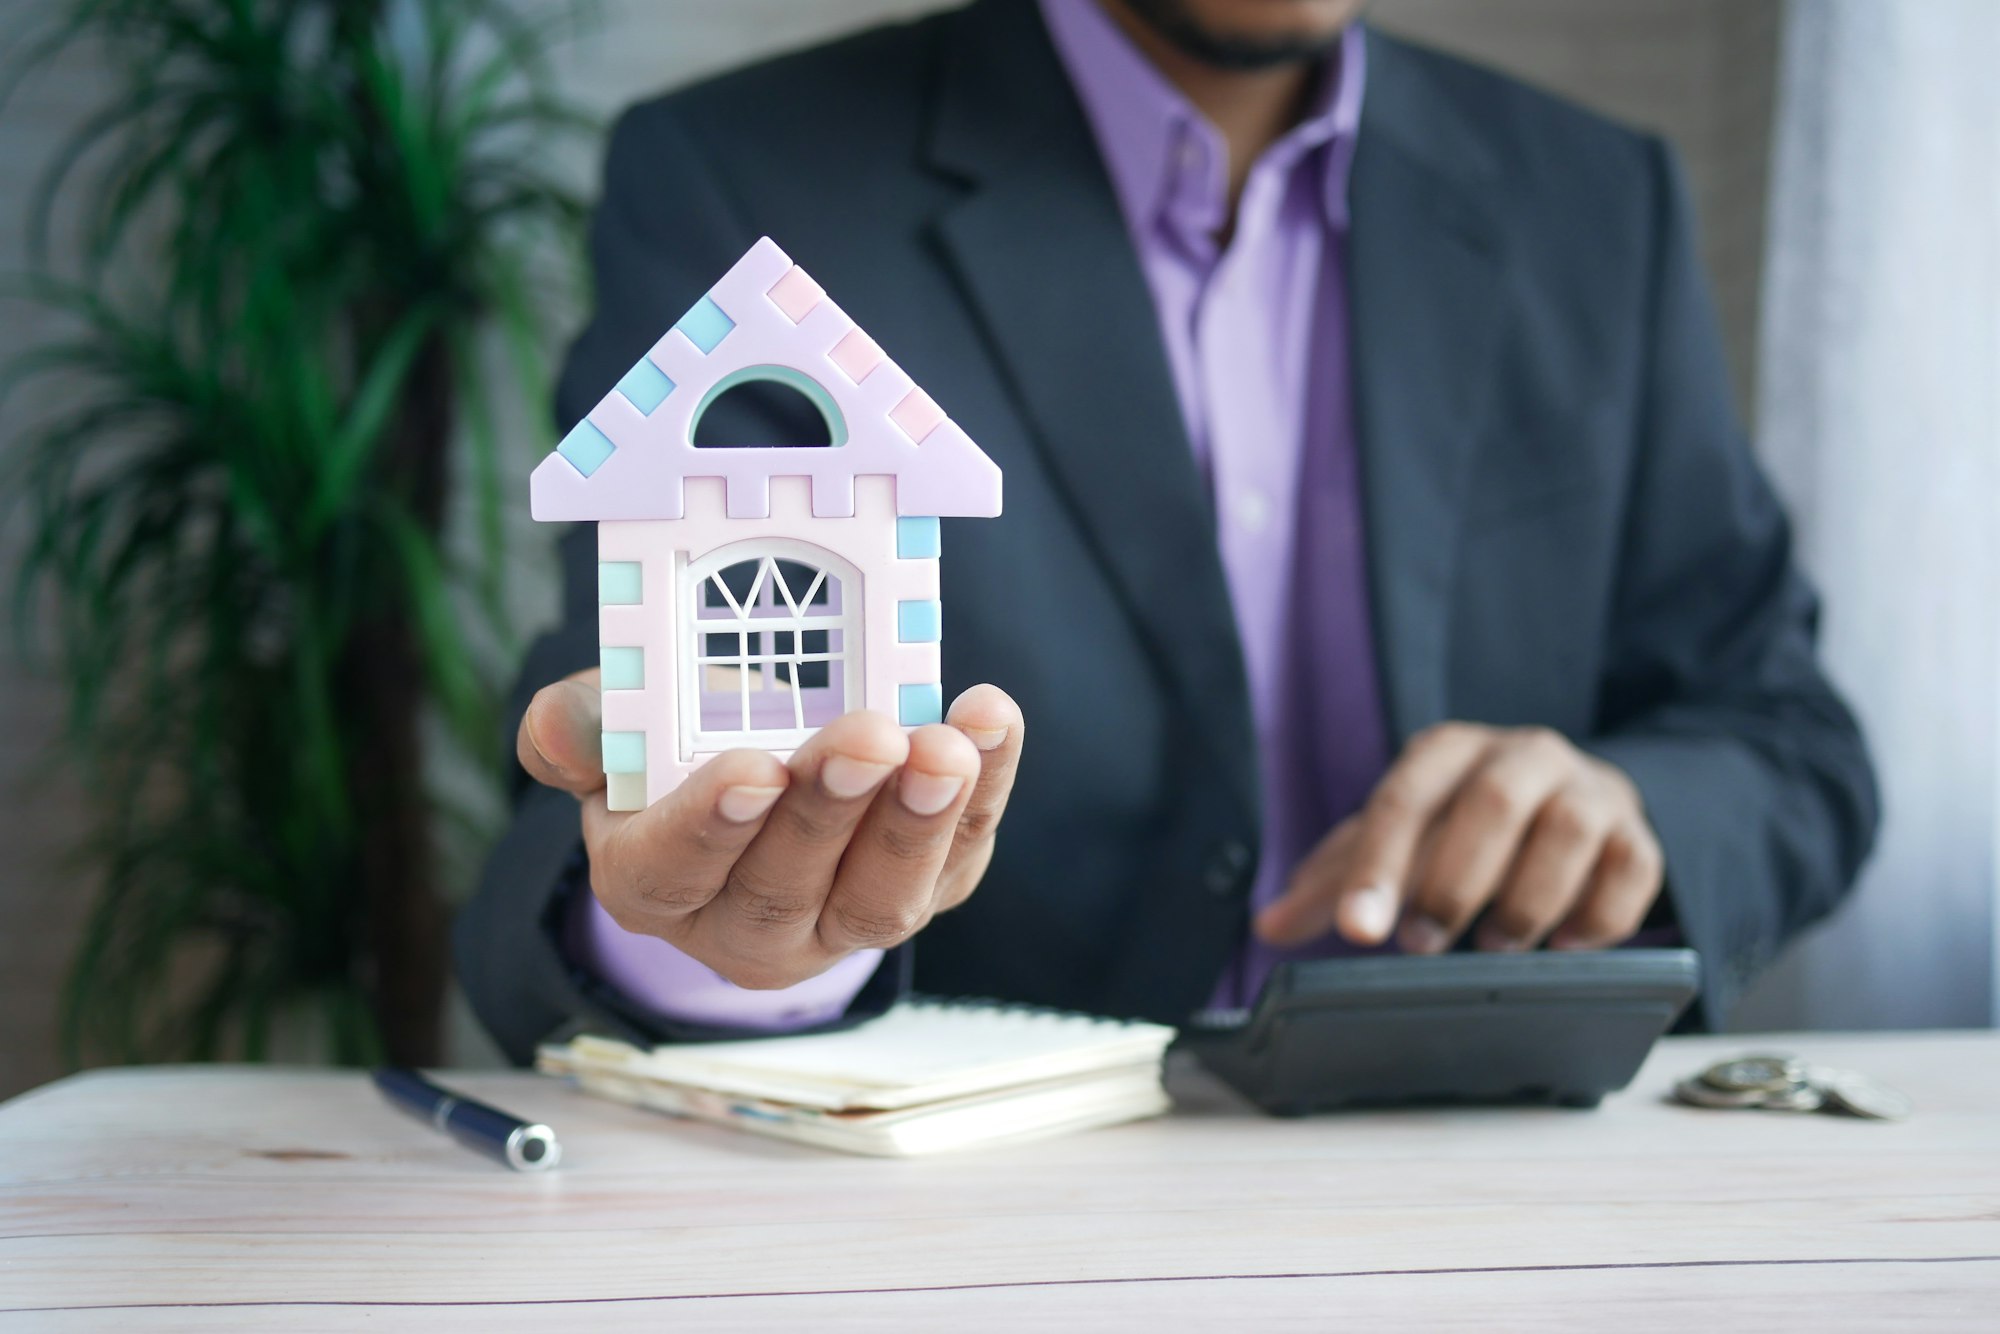 Save time and Money by Hiring a Property Management Virtual Assistant